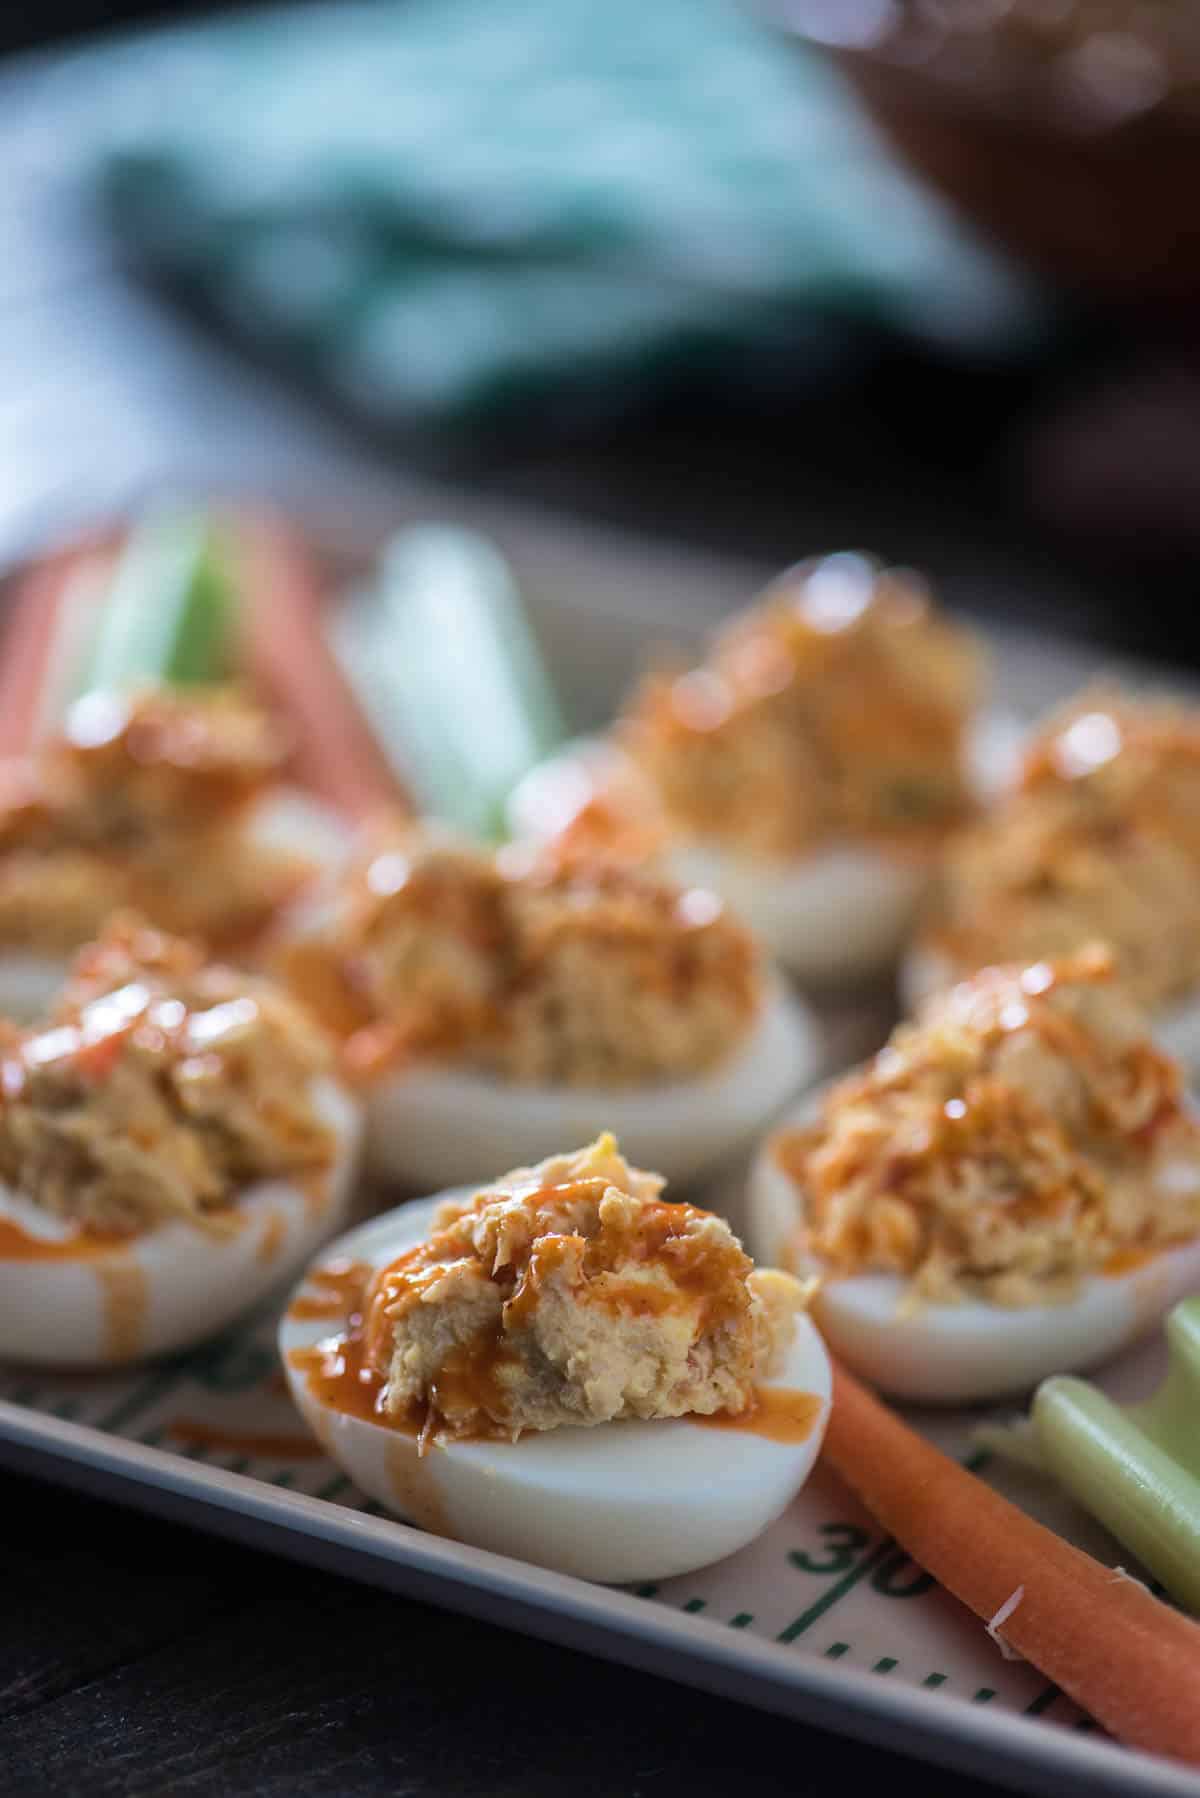 Can't decide between the chicken or the egg? Have both! These Buffalo Chicken Deviled Eggs are everything you love about big game appetizers, and so much more!